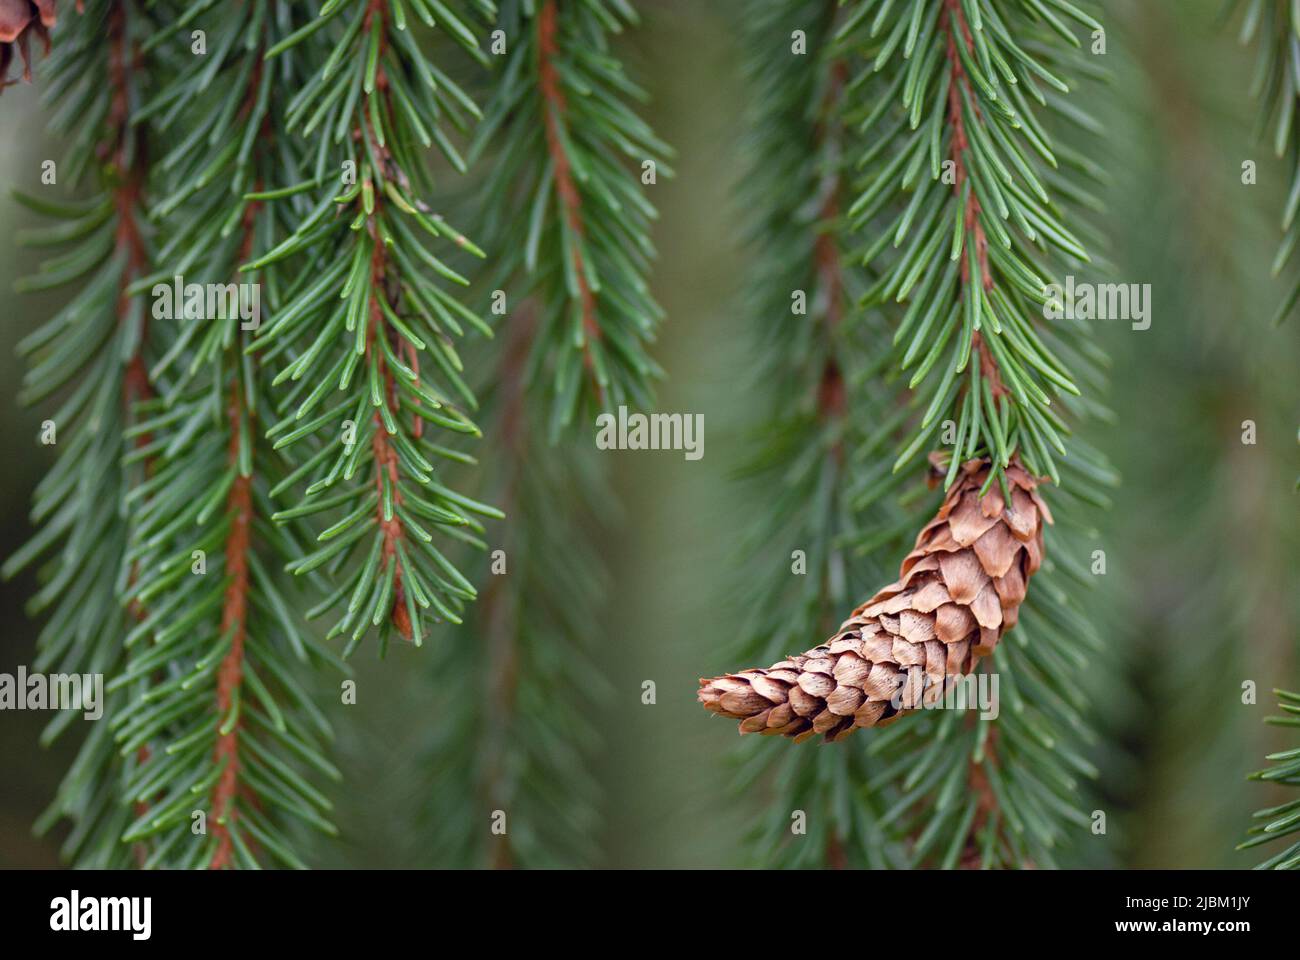 Weeping Norway Spruce (Picea abies f. pendula) branch with cone. Stock Photo